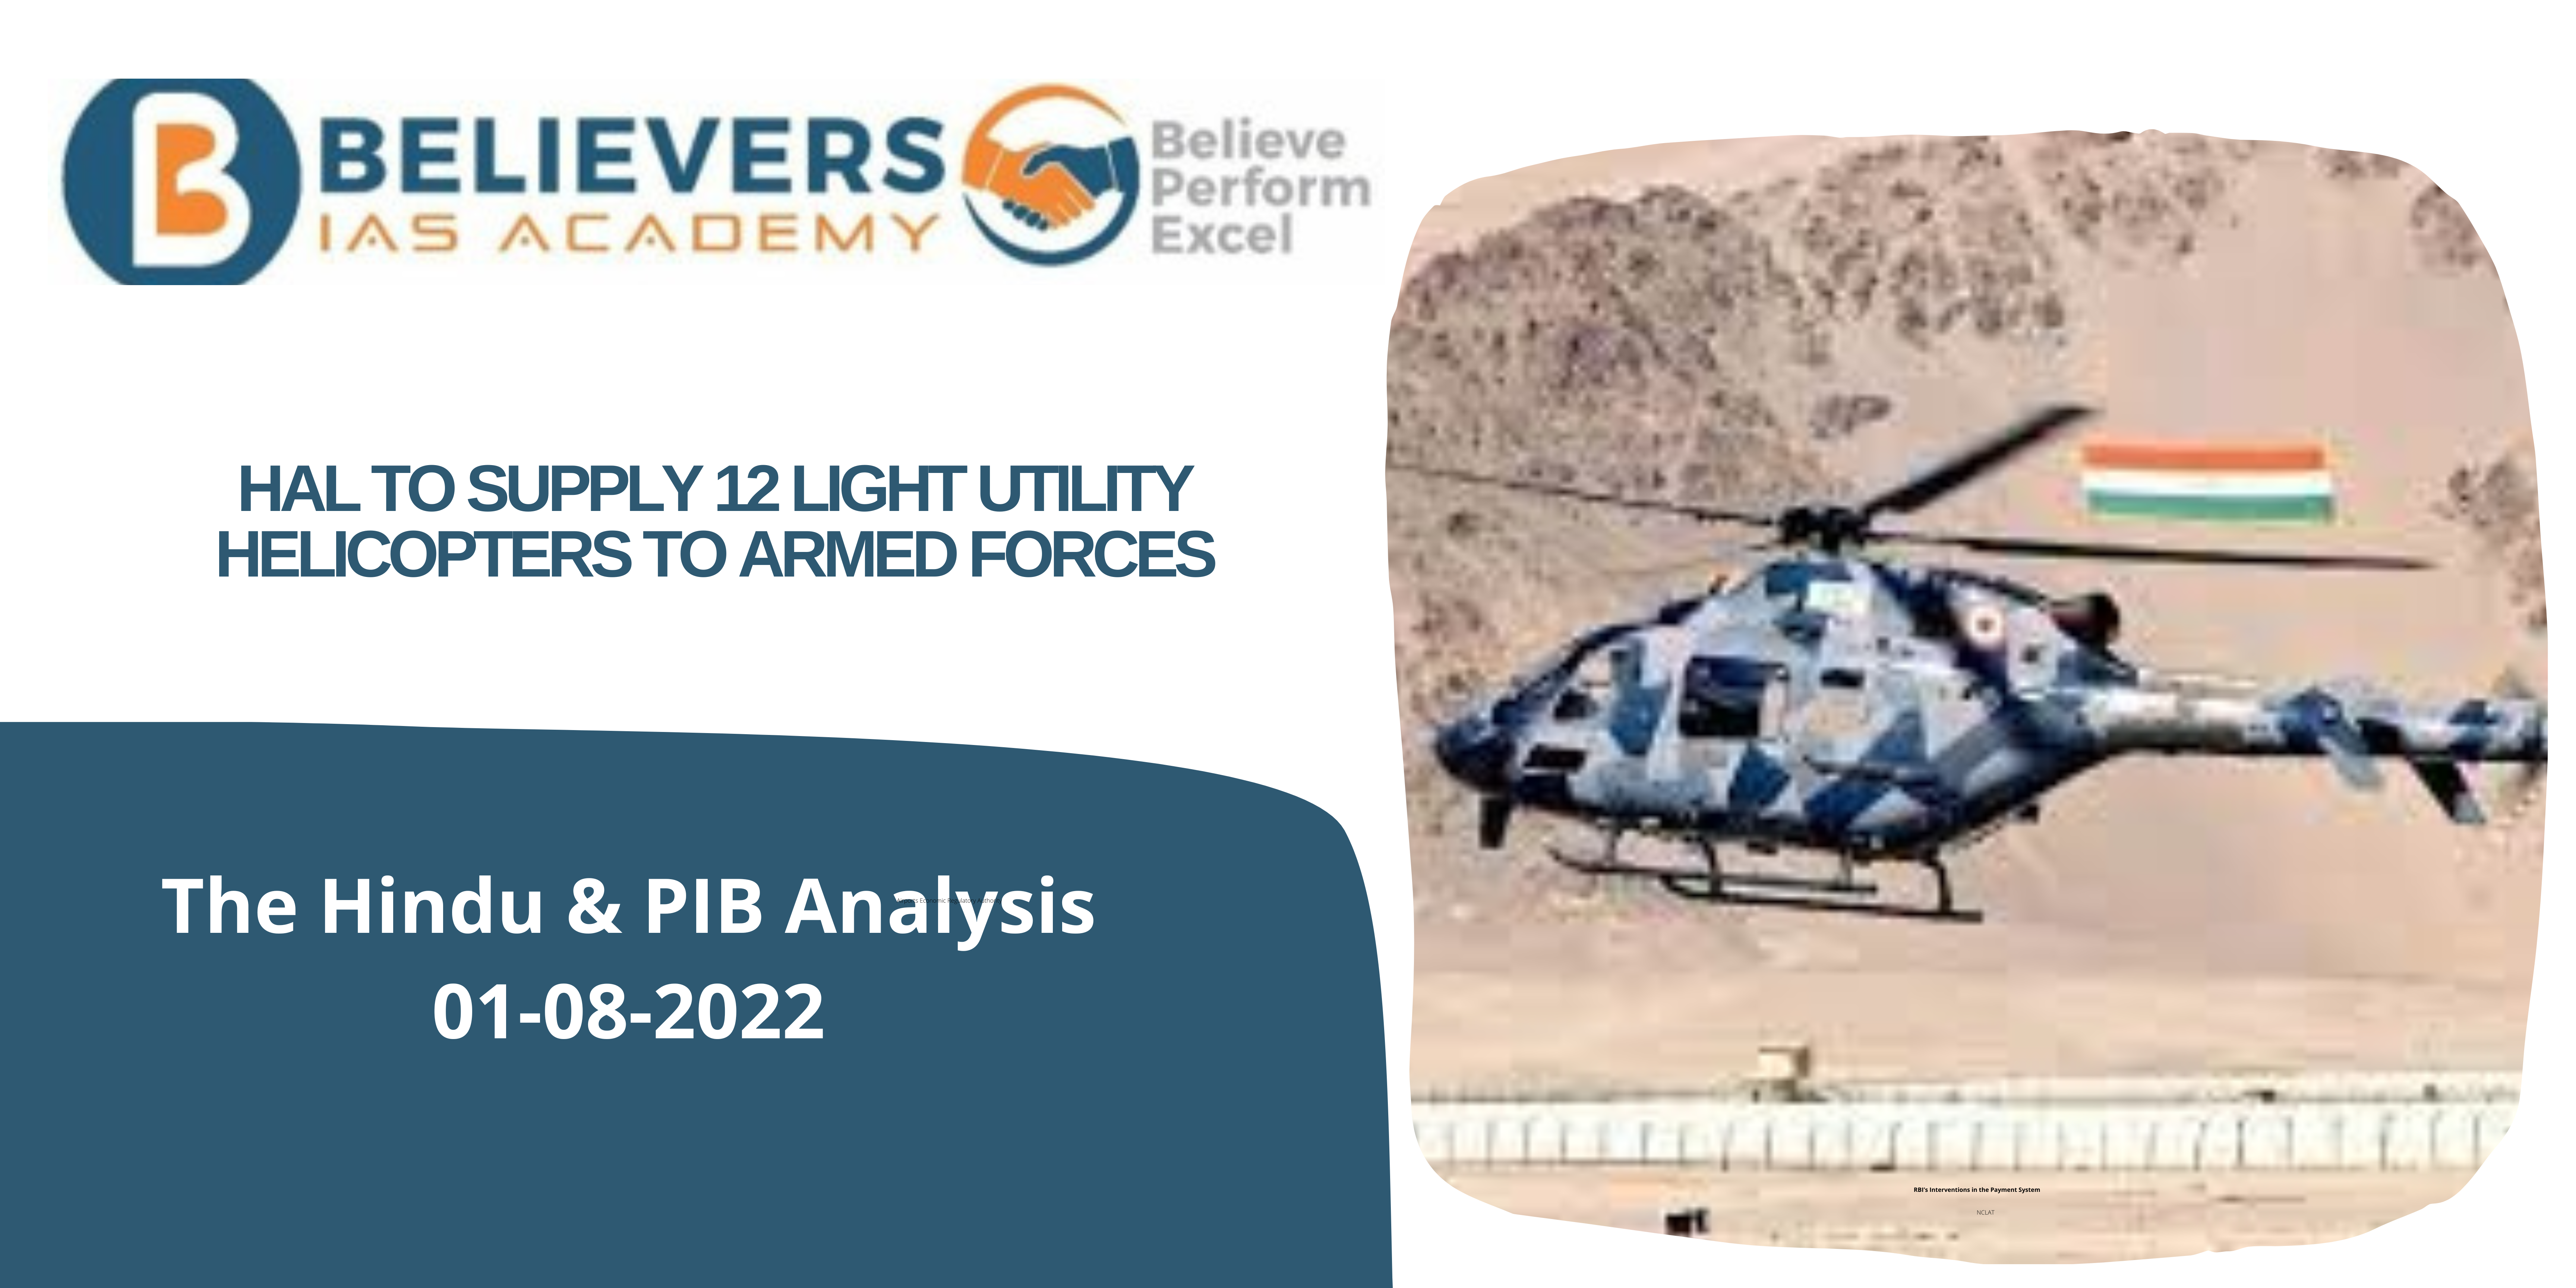 UPSC Current affairs - HAL to Supply 12 Light Utility Helicopters to Armed Forces